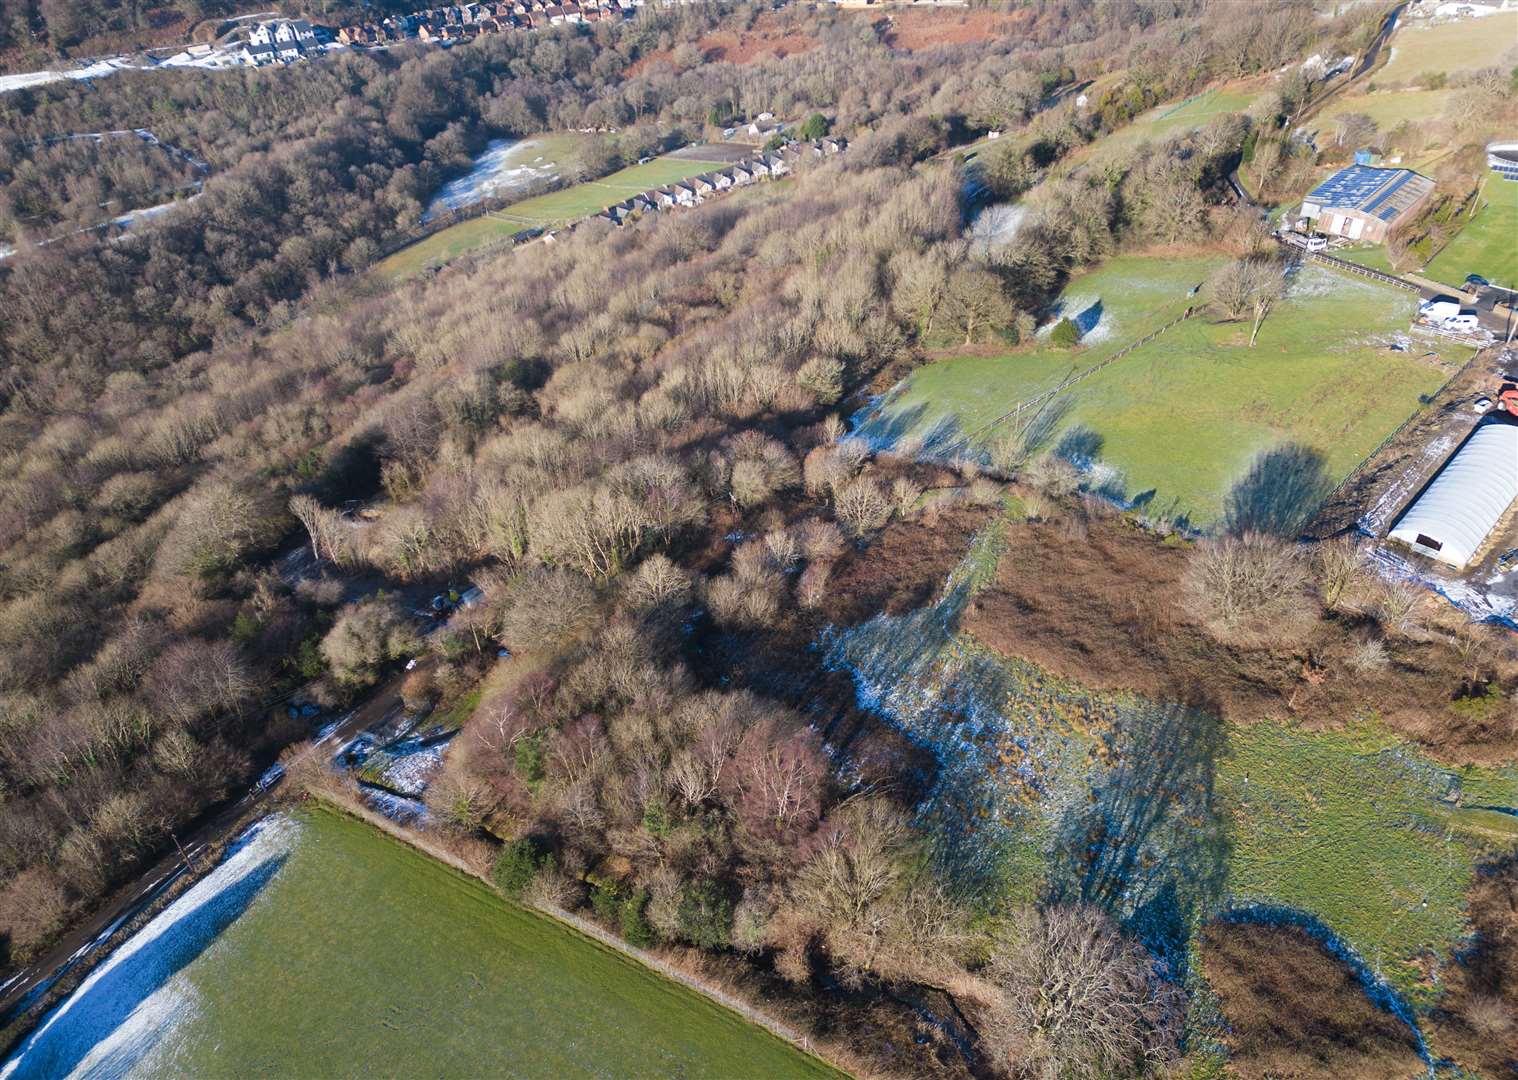 The woodland through which the leachate flowed, from the landfill in the bottom right to a road by the houses (Andrew Matthews/PA)